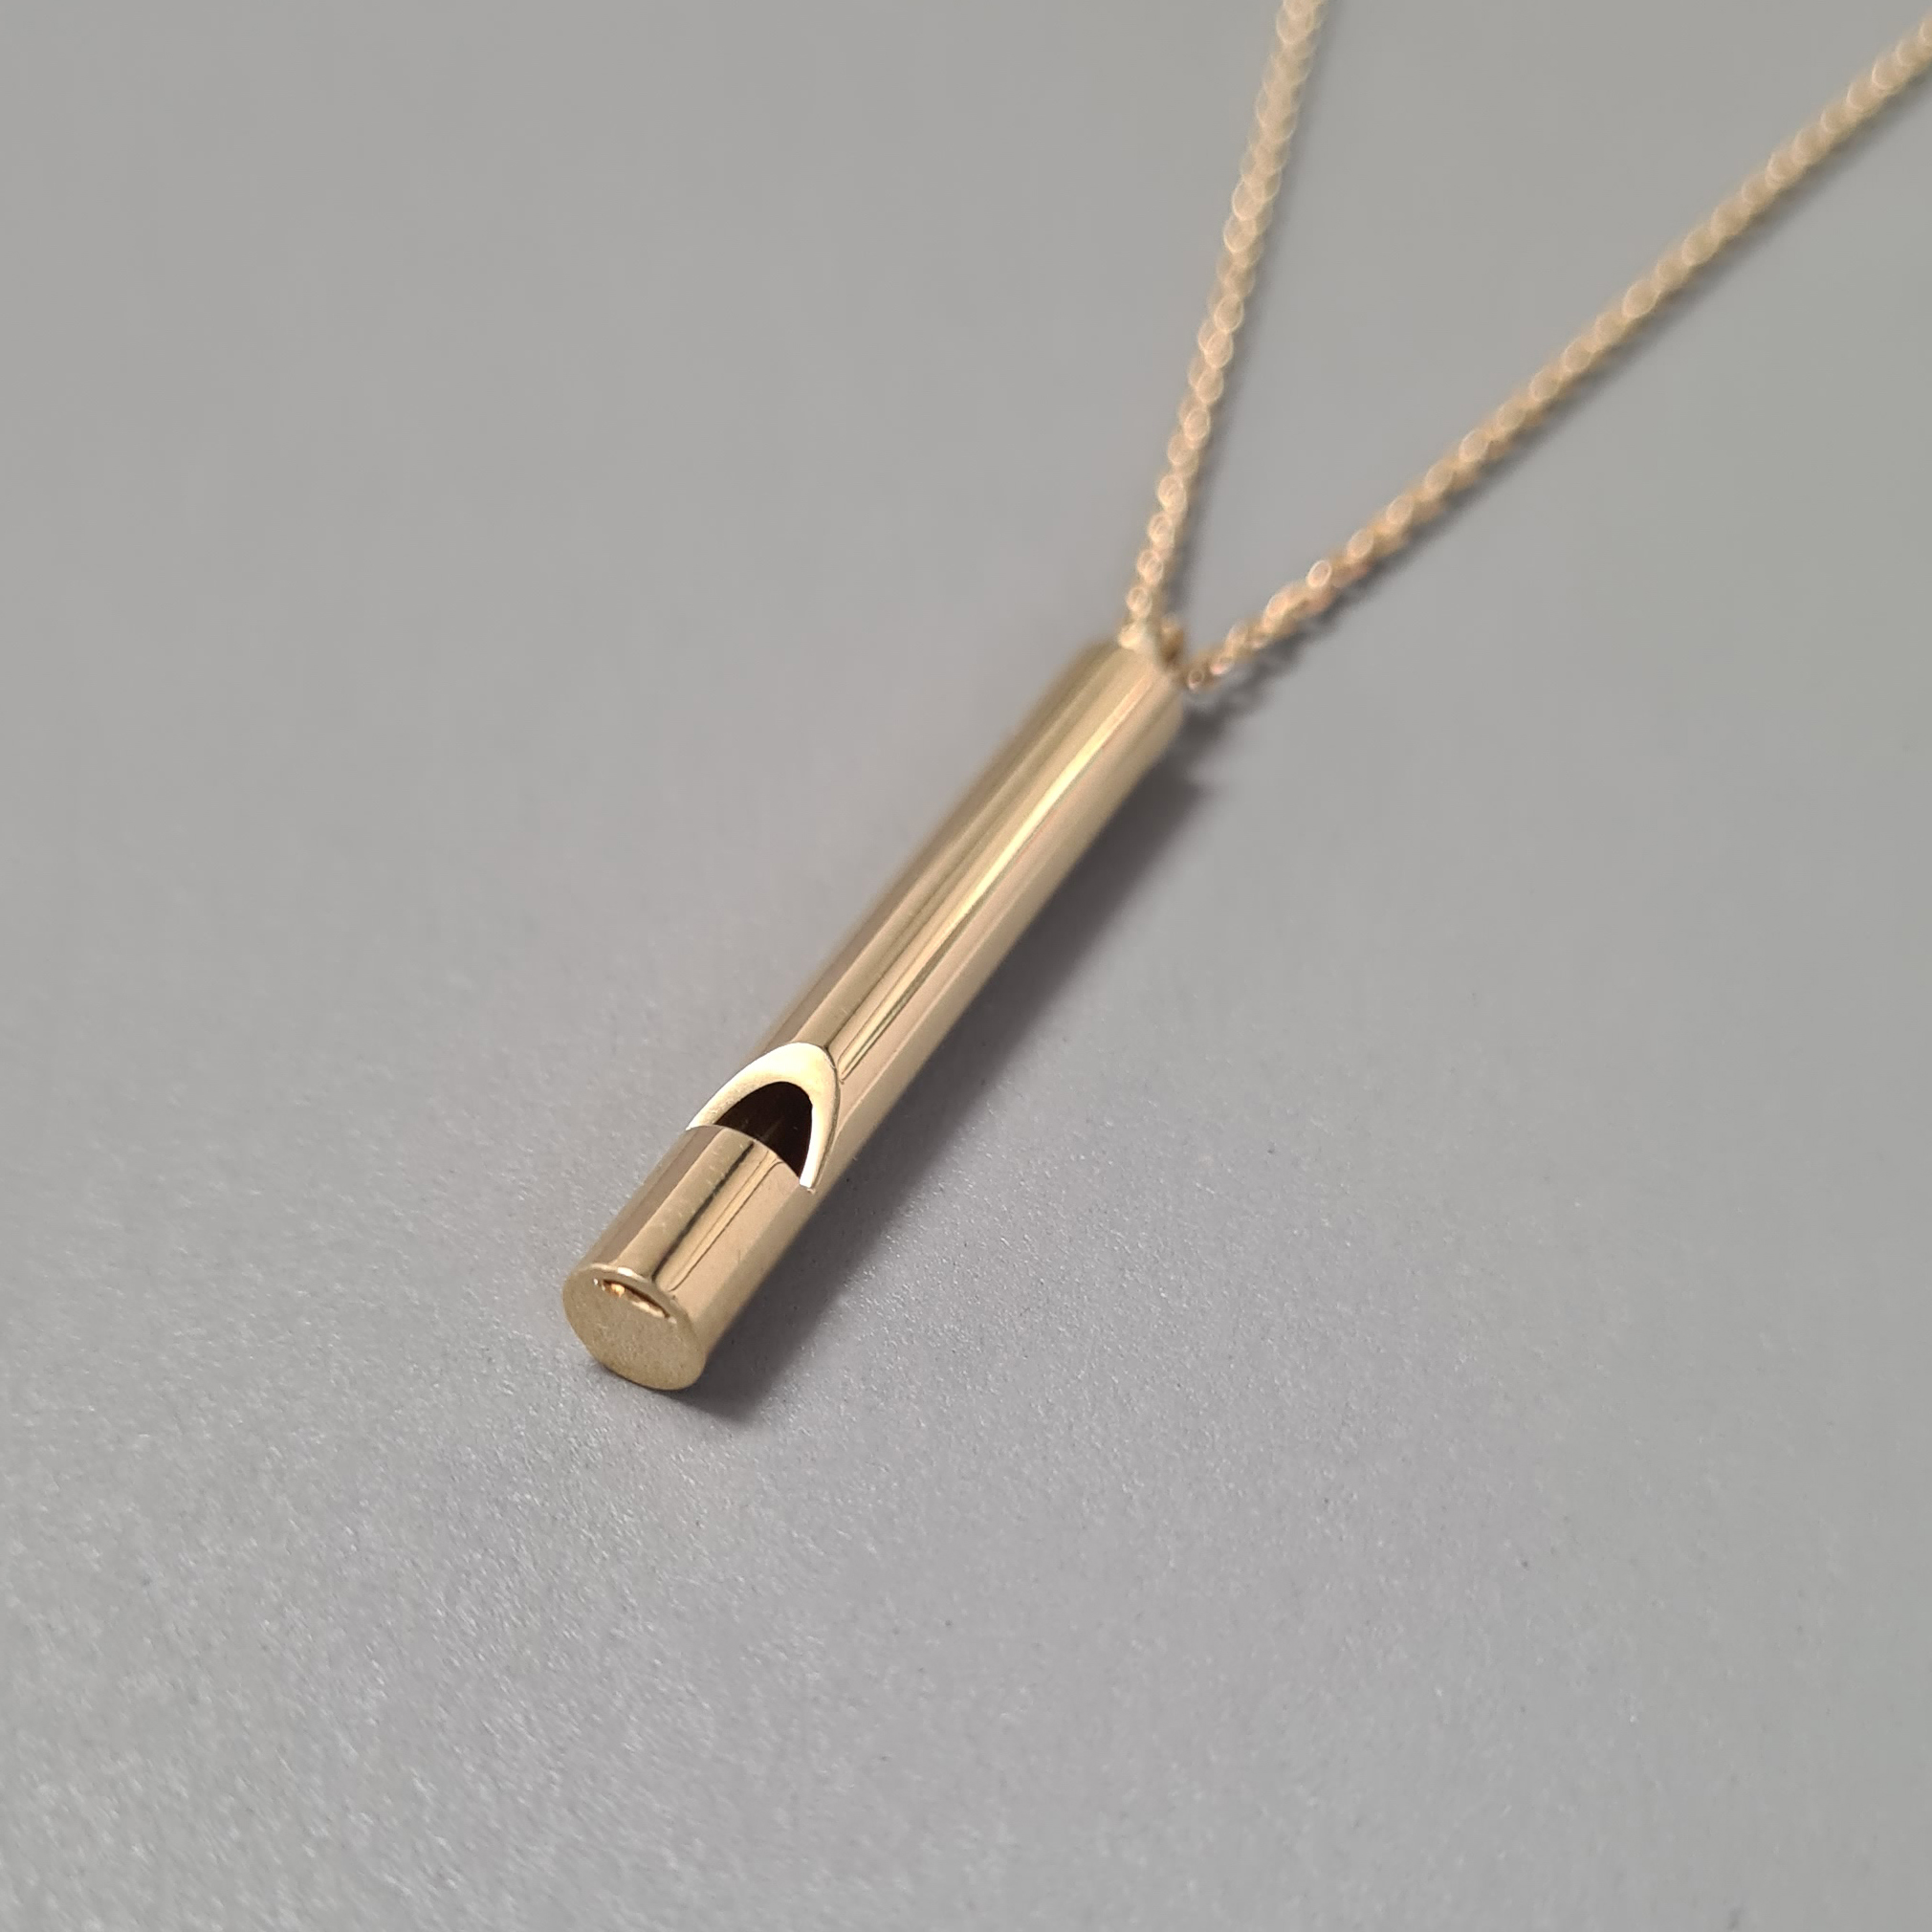 Close up of 18k gold whistle on grey background.